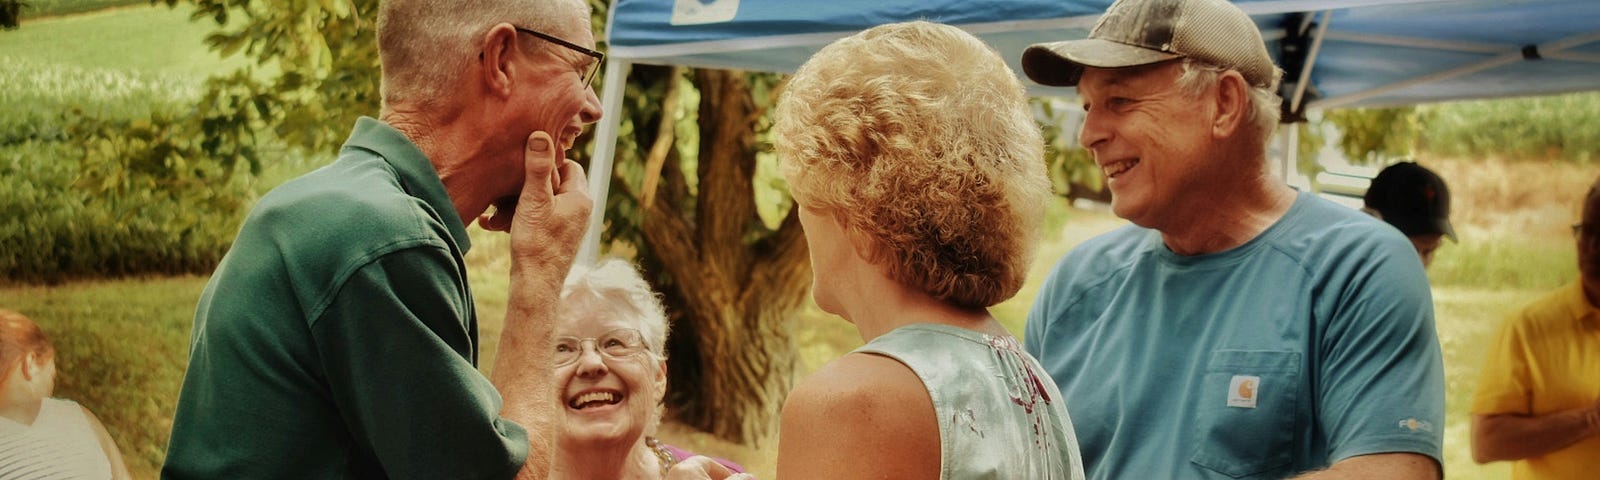 Group of older people smiling at a reunion